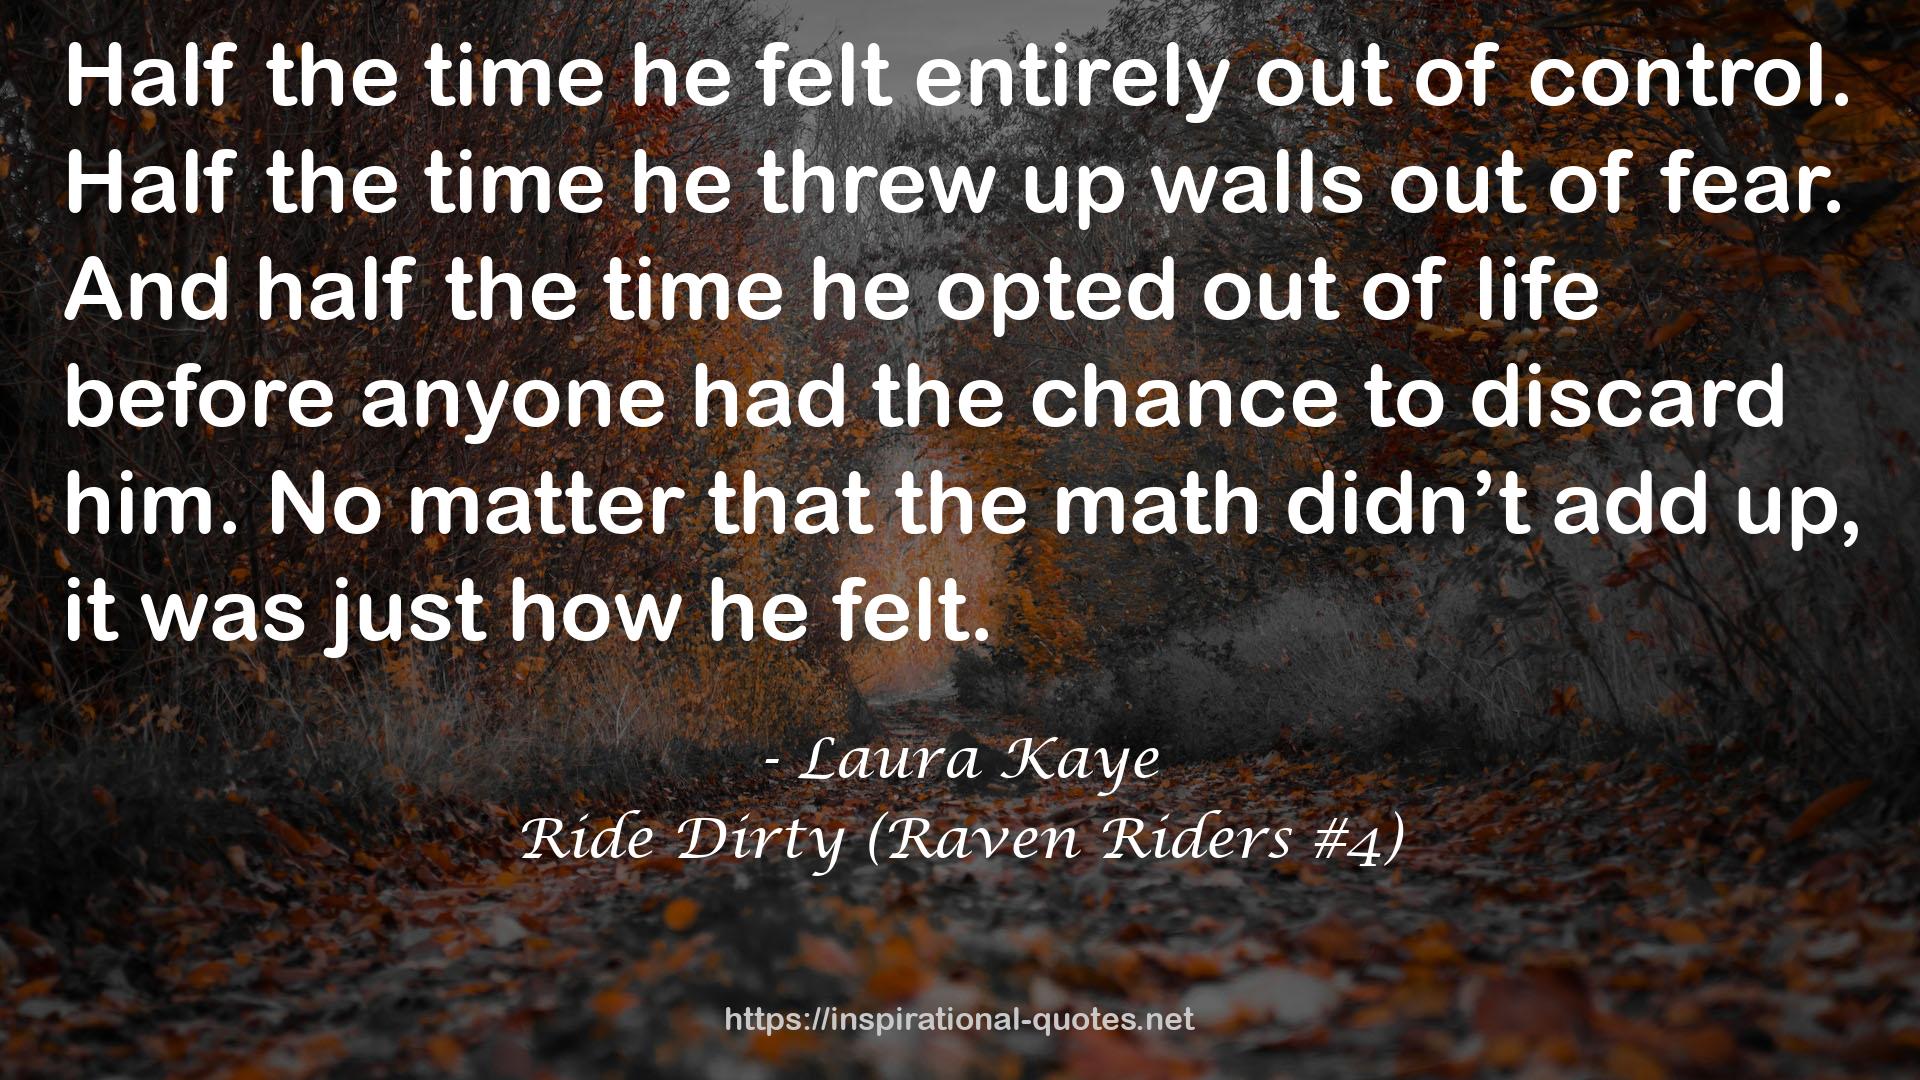 Ride Dirty (Raven Riders #4) QUOTES